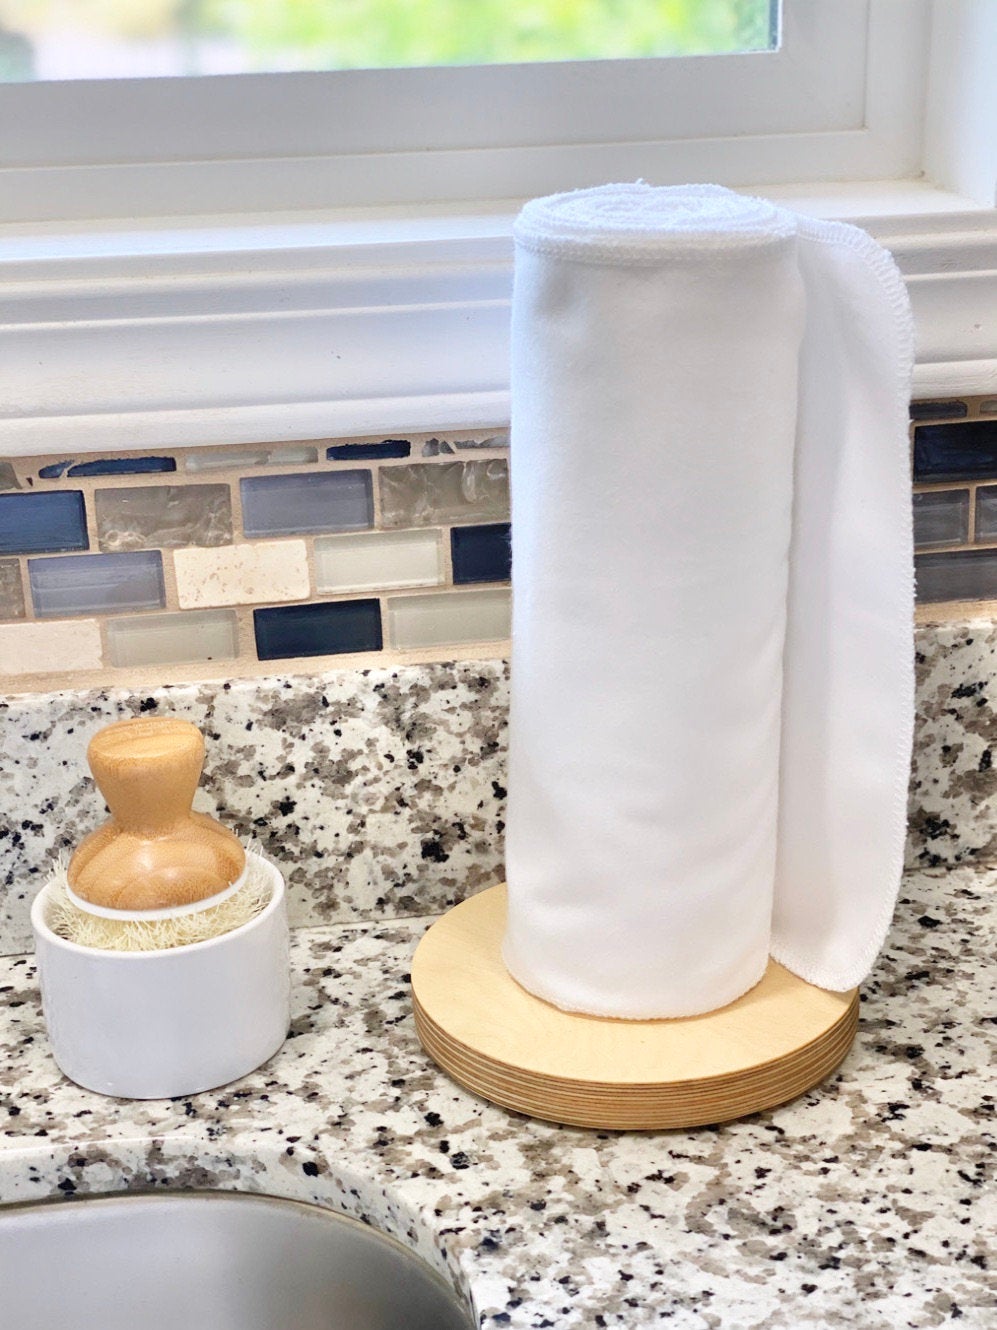 Paper Towel Holder with Reusable Paper Towel Alternative